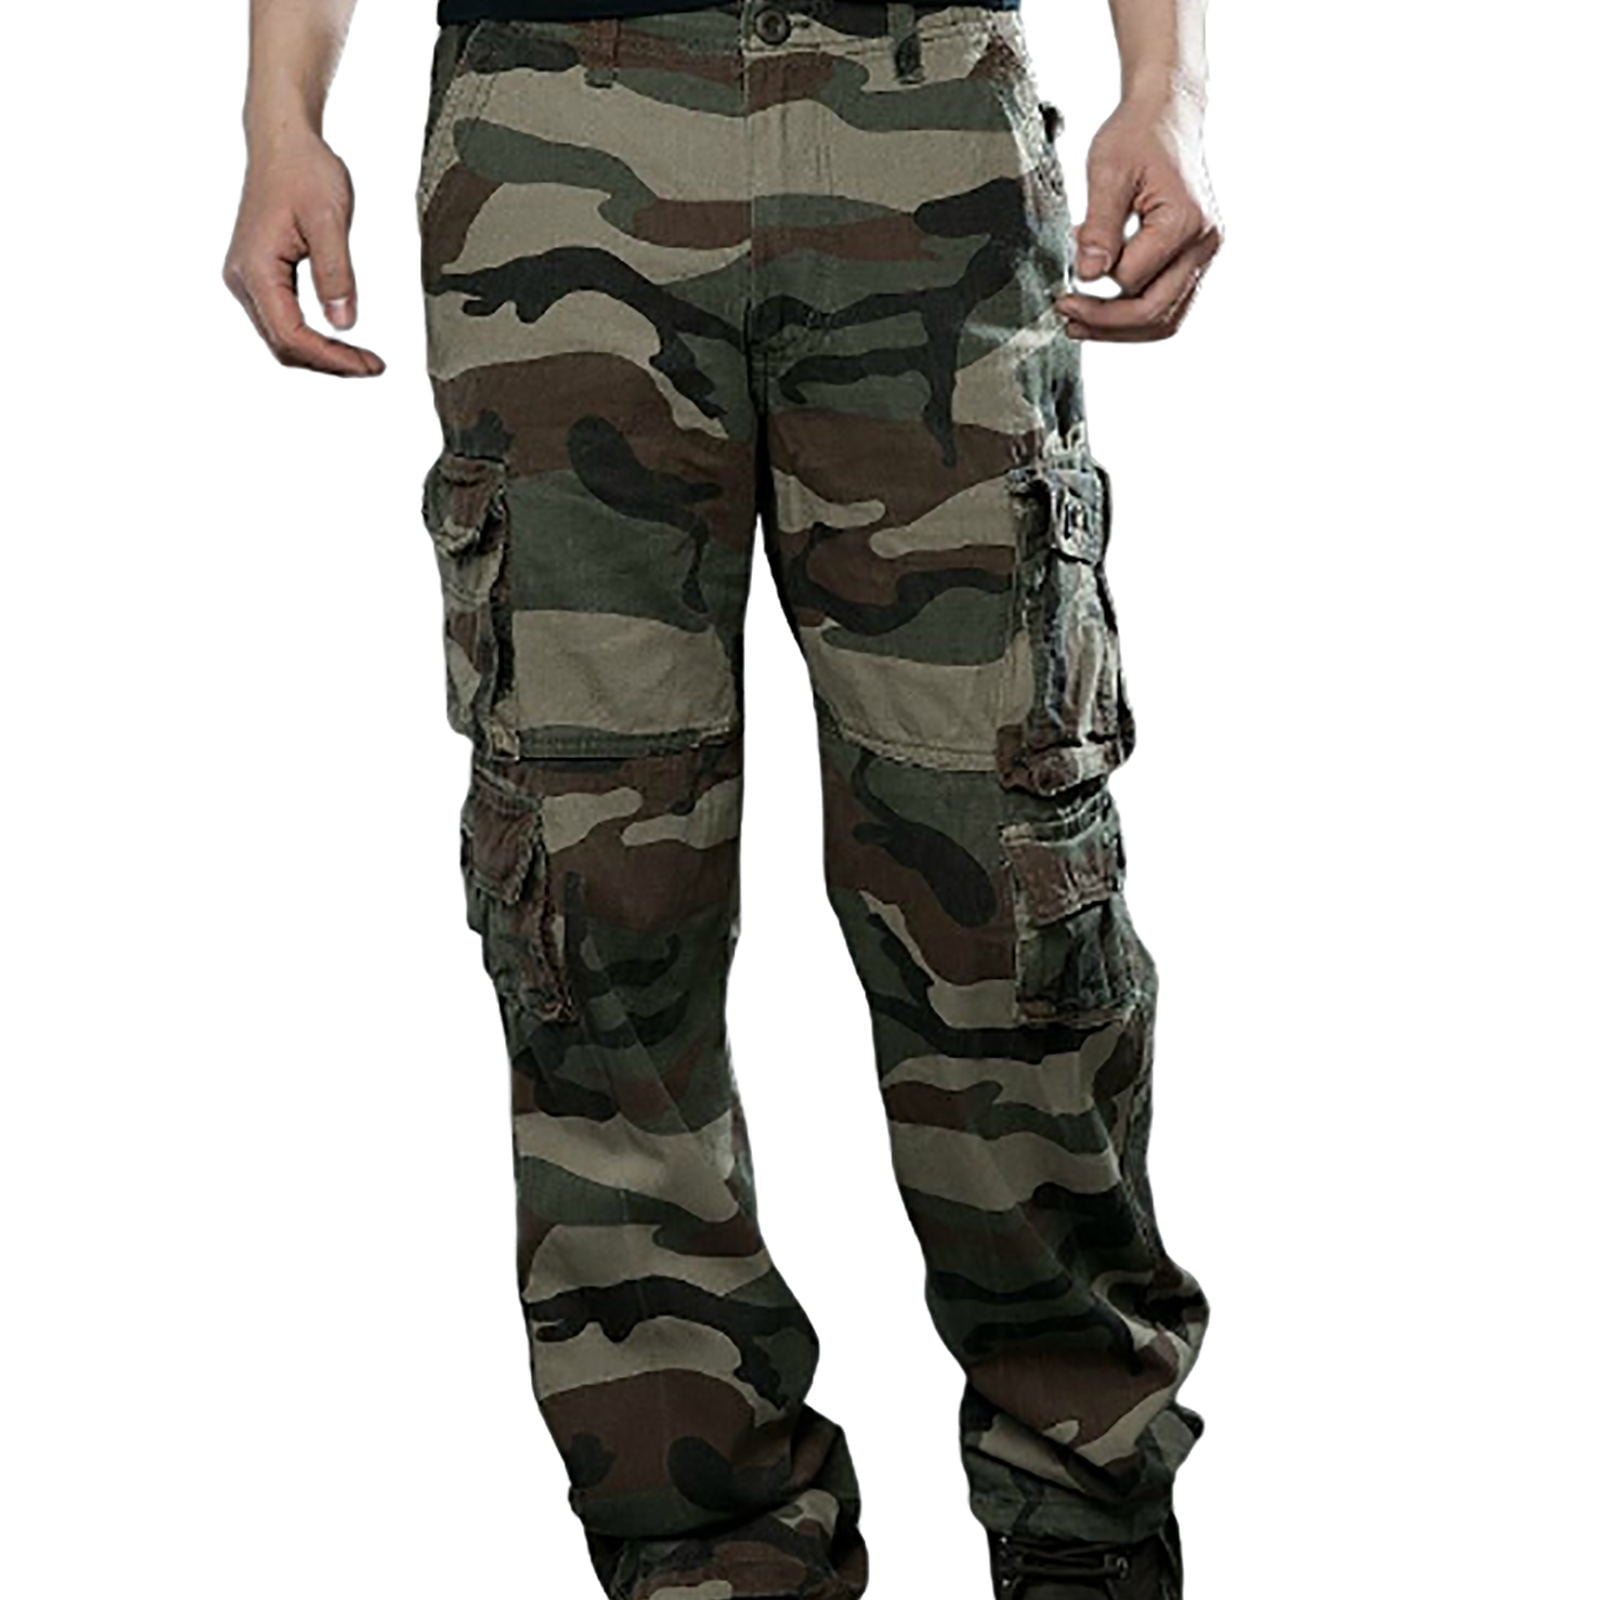 OGLCCG Men's Casual Cargo Pants Straight Leg Relaxed Fit Military Army ...